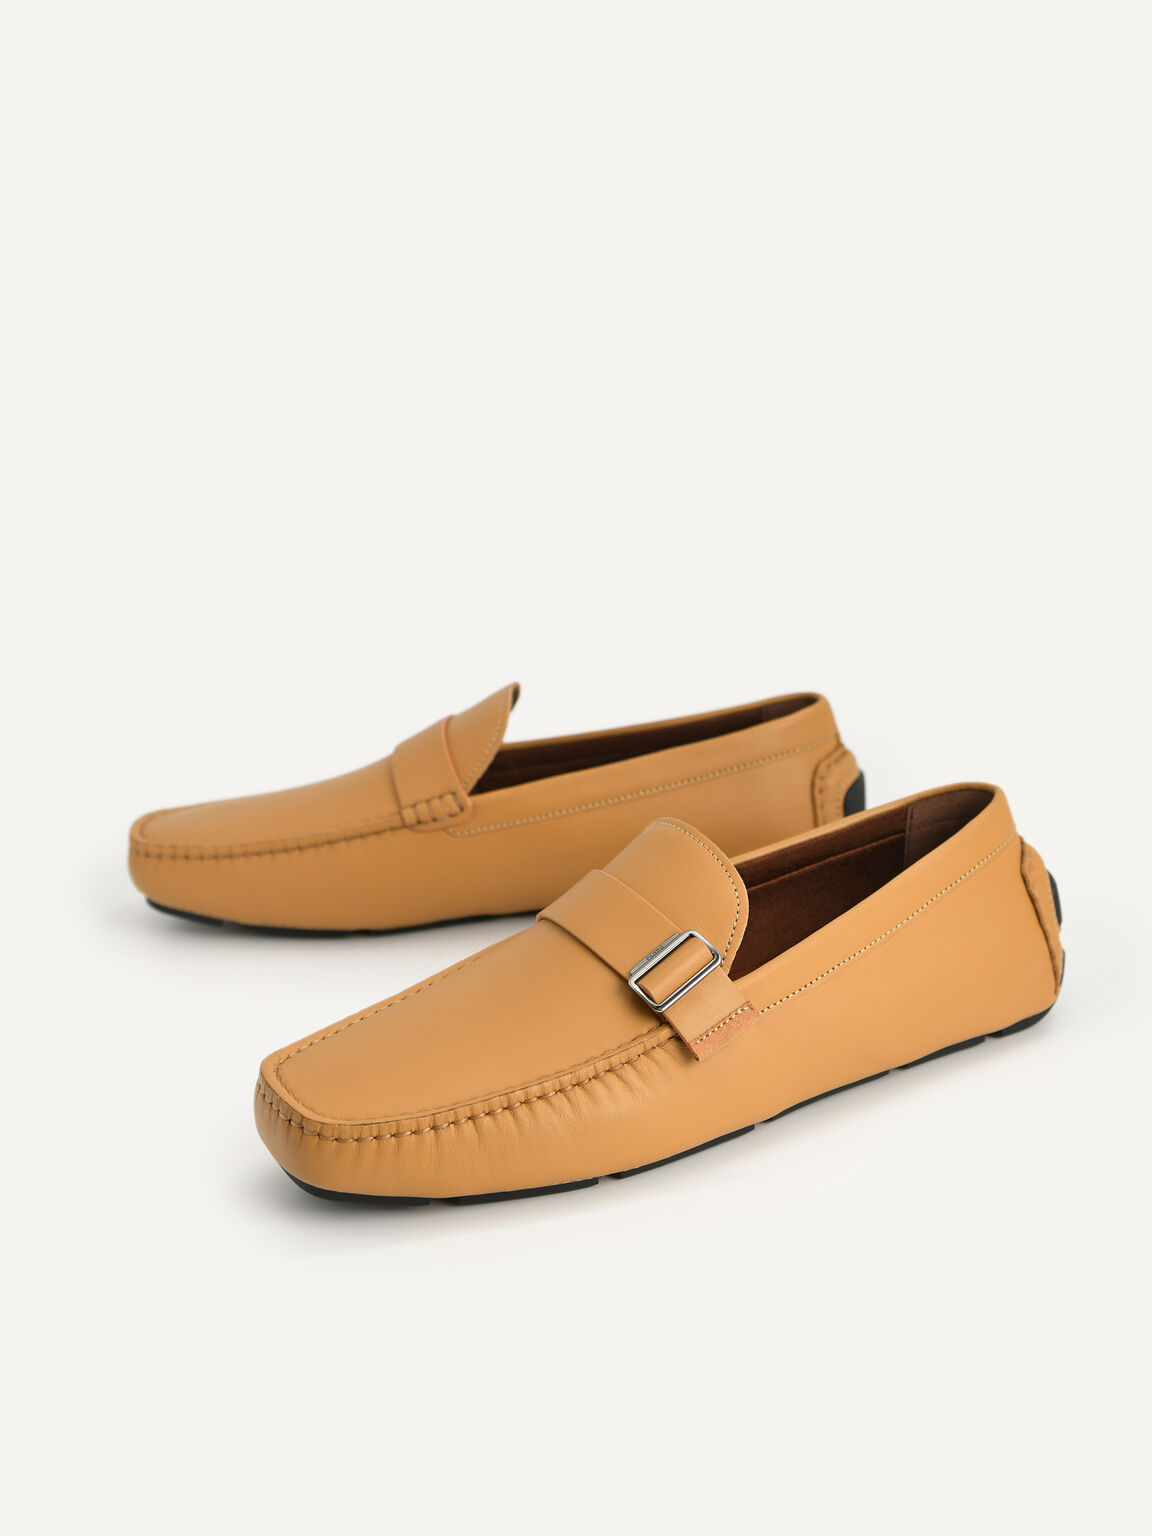 Leather Moccasins with Buckle Detail, Camel